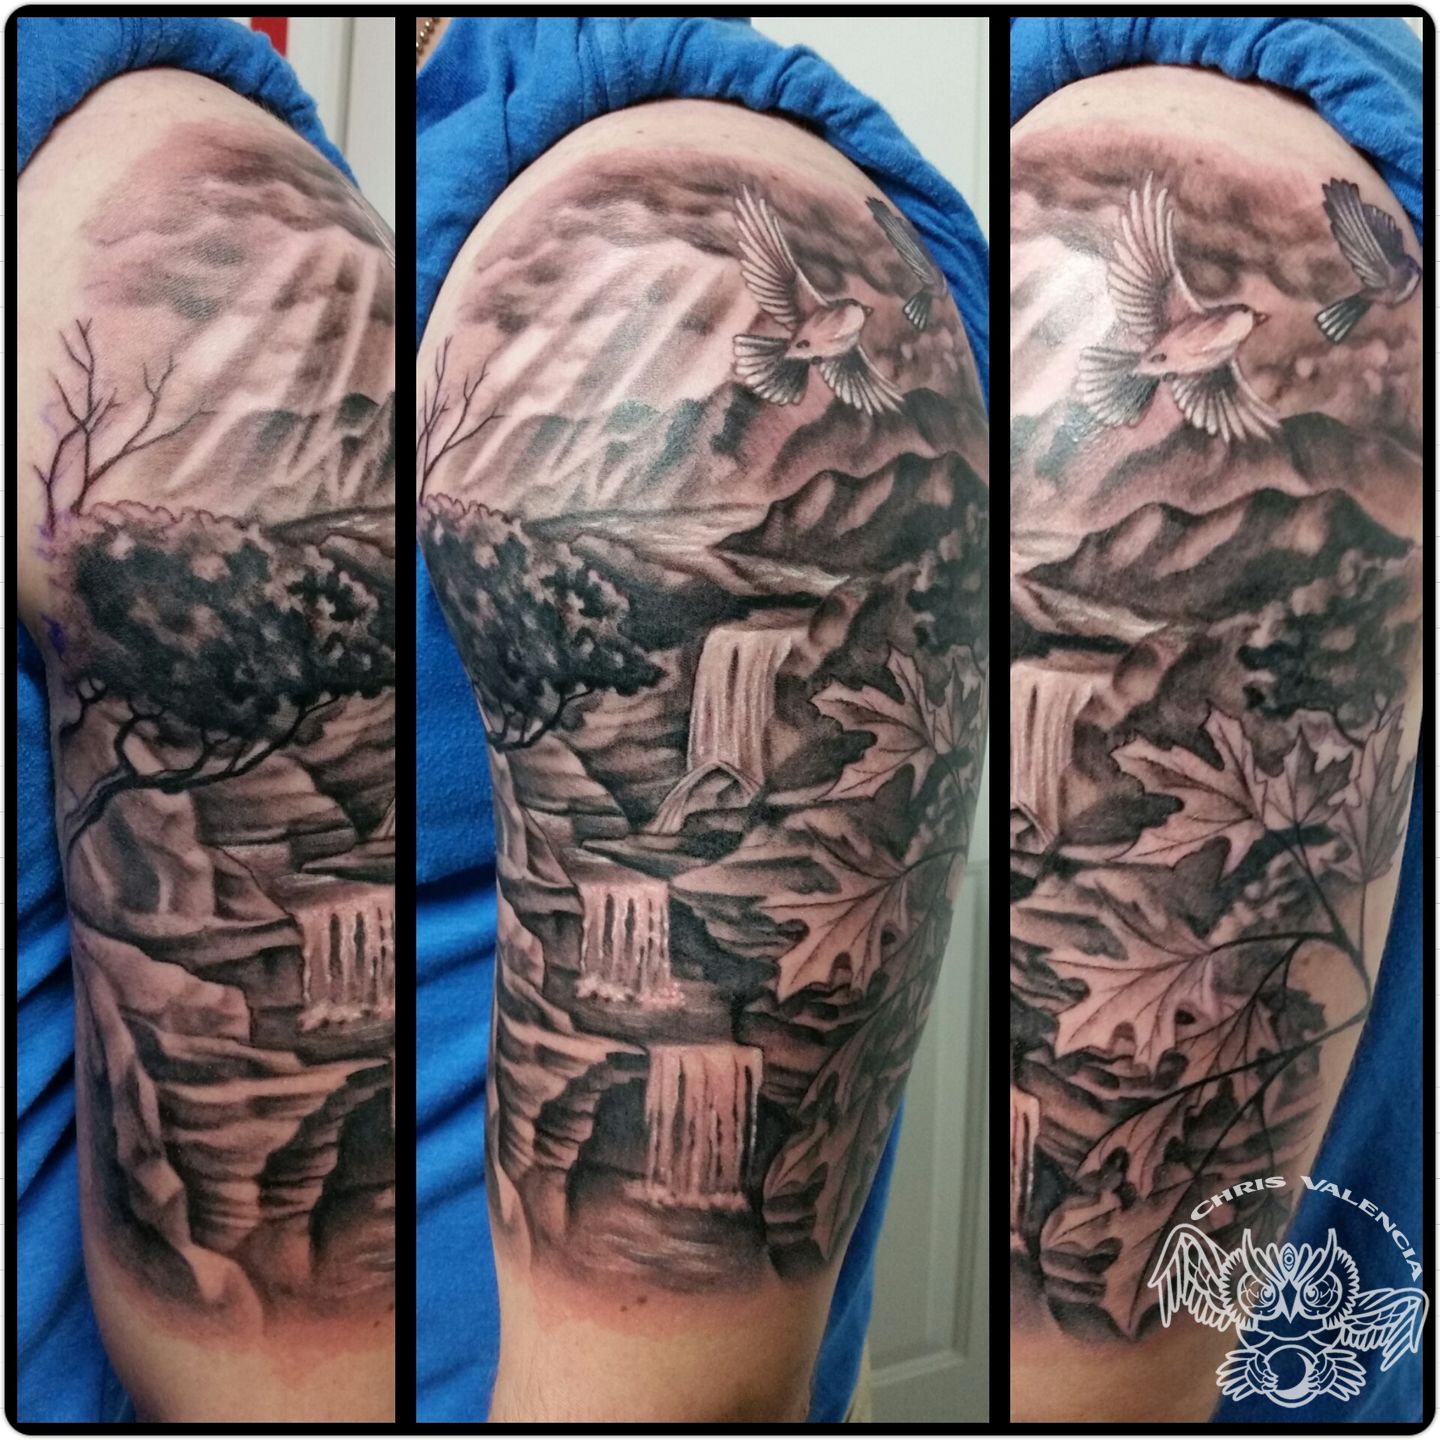 Fantastic waterfall tattoo ideas to inspire you